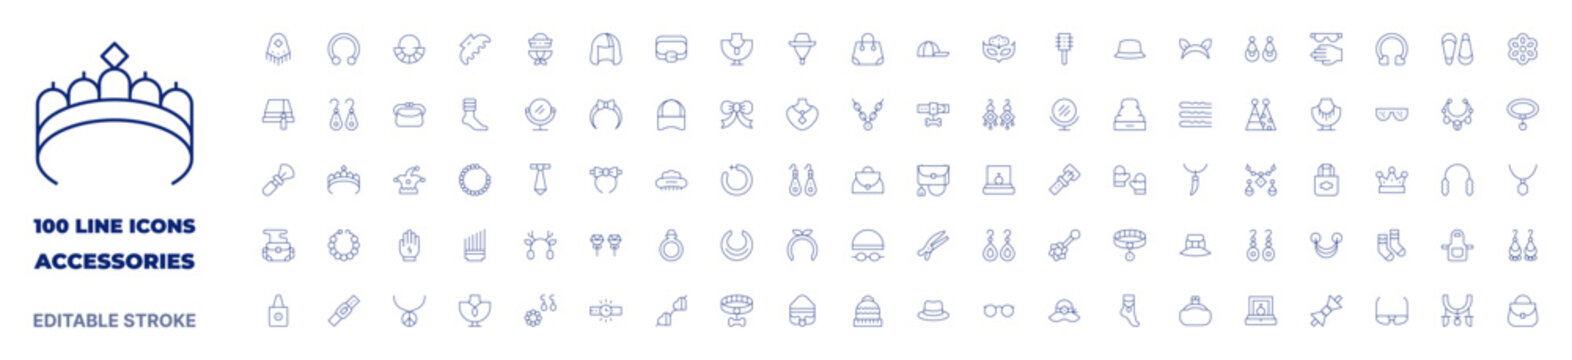 100 icons Accessories collection. Thin line icon. Editable stroke. Accessories icons for web and mobile app.-1